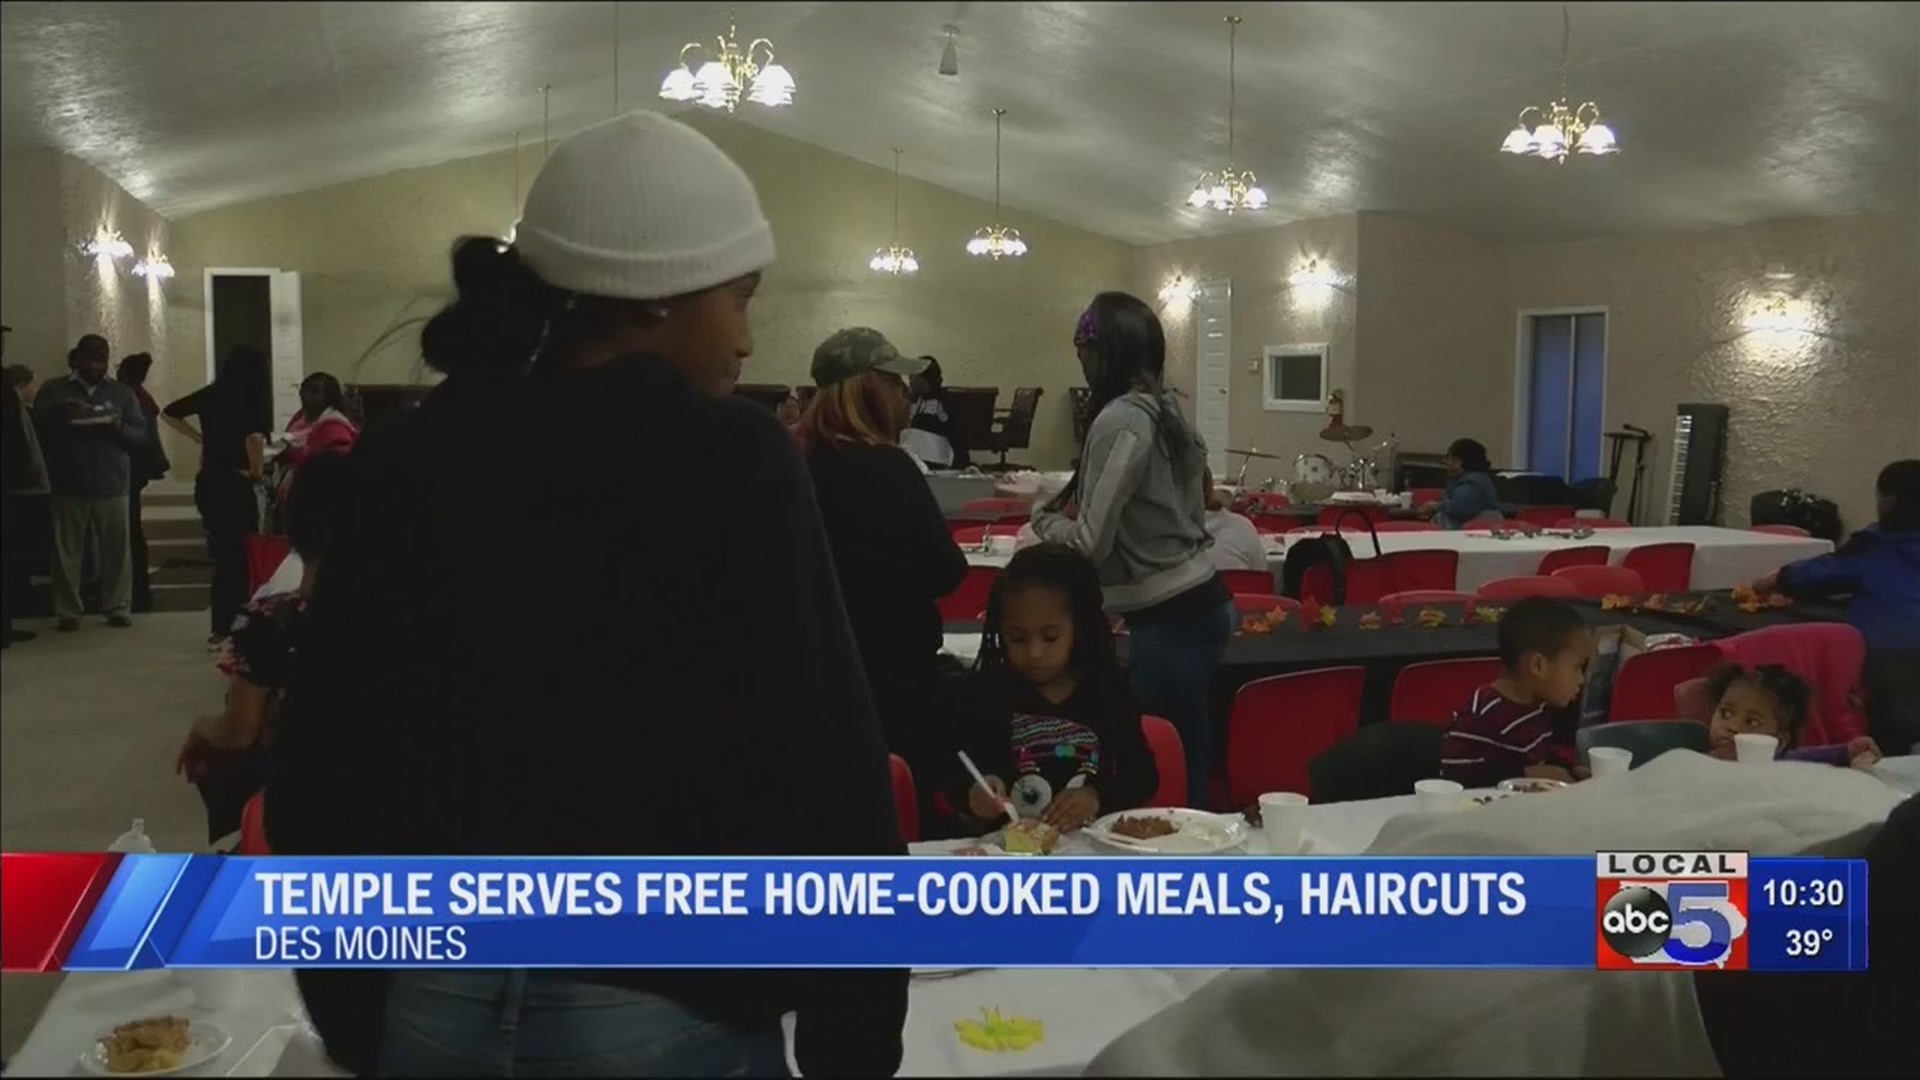 THE TEMPLE'S BREAD OF LIFE OUTREACH TEAM SERVED FREE HOME-COOKED MEALS THIS EVENING AND ARE PLANNING A WINTER COAT GIVEAWAY FOR TOMORROW FROM TEN TO ONE.